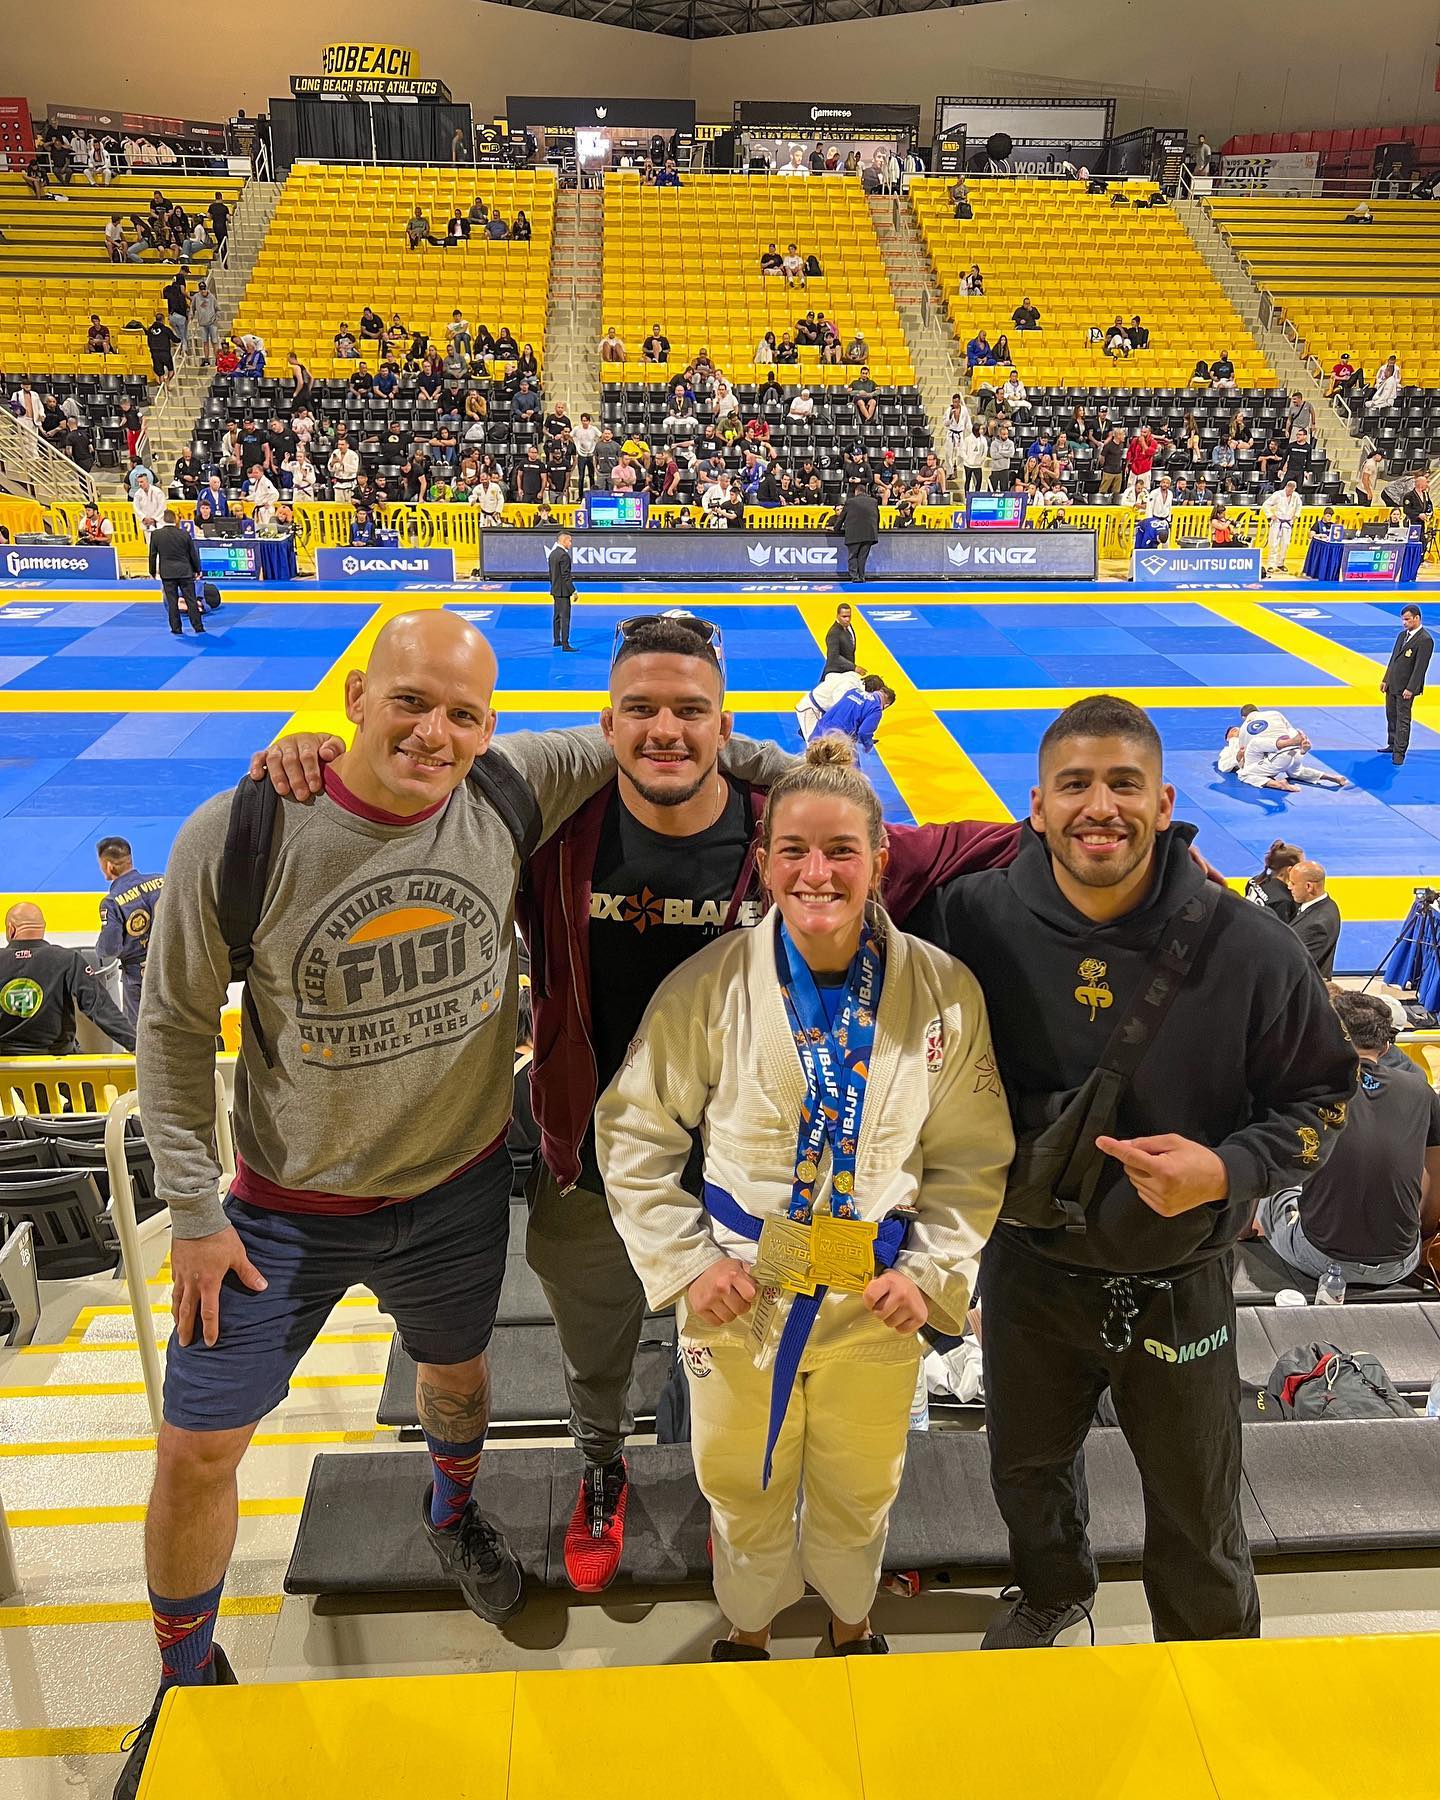 Master international recap—well there was no one in my division. I had two matches in open class, I won one and lost one. I am very happy and proud of myself. All I wanted was to do better than my last performance. 

Yesterday was the first time I felt comfortable and confident competing in the gi. I stepped on the mat and trusted my jiu jitsu. Obviously, there are things to work. But for now, I will rest and recover for The World Championship tomorrow. 🤙🏻🤙🏻
.
.
. #sixblades #jiujitsugirl #jiujitsugirls #bjj #bjjgirl #bjjgirls #chickswhofight #fusionhunnies #jiujitsusaveslives #walterpyramid #longbeach #losangeles